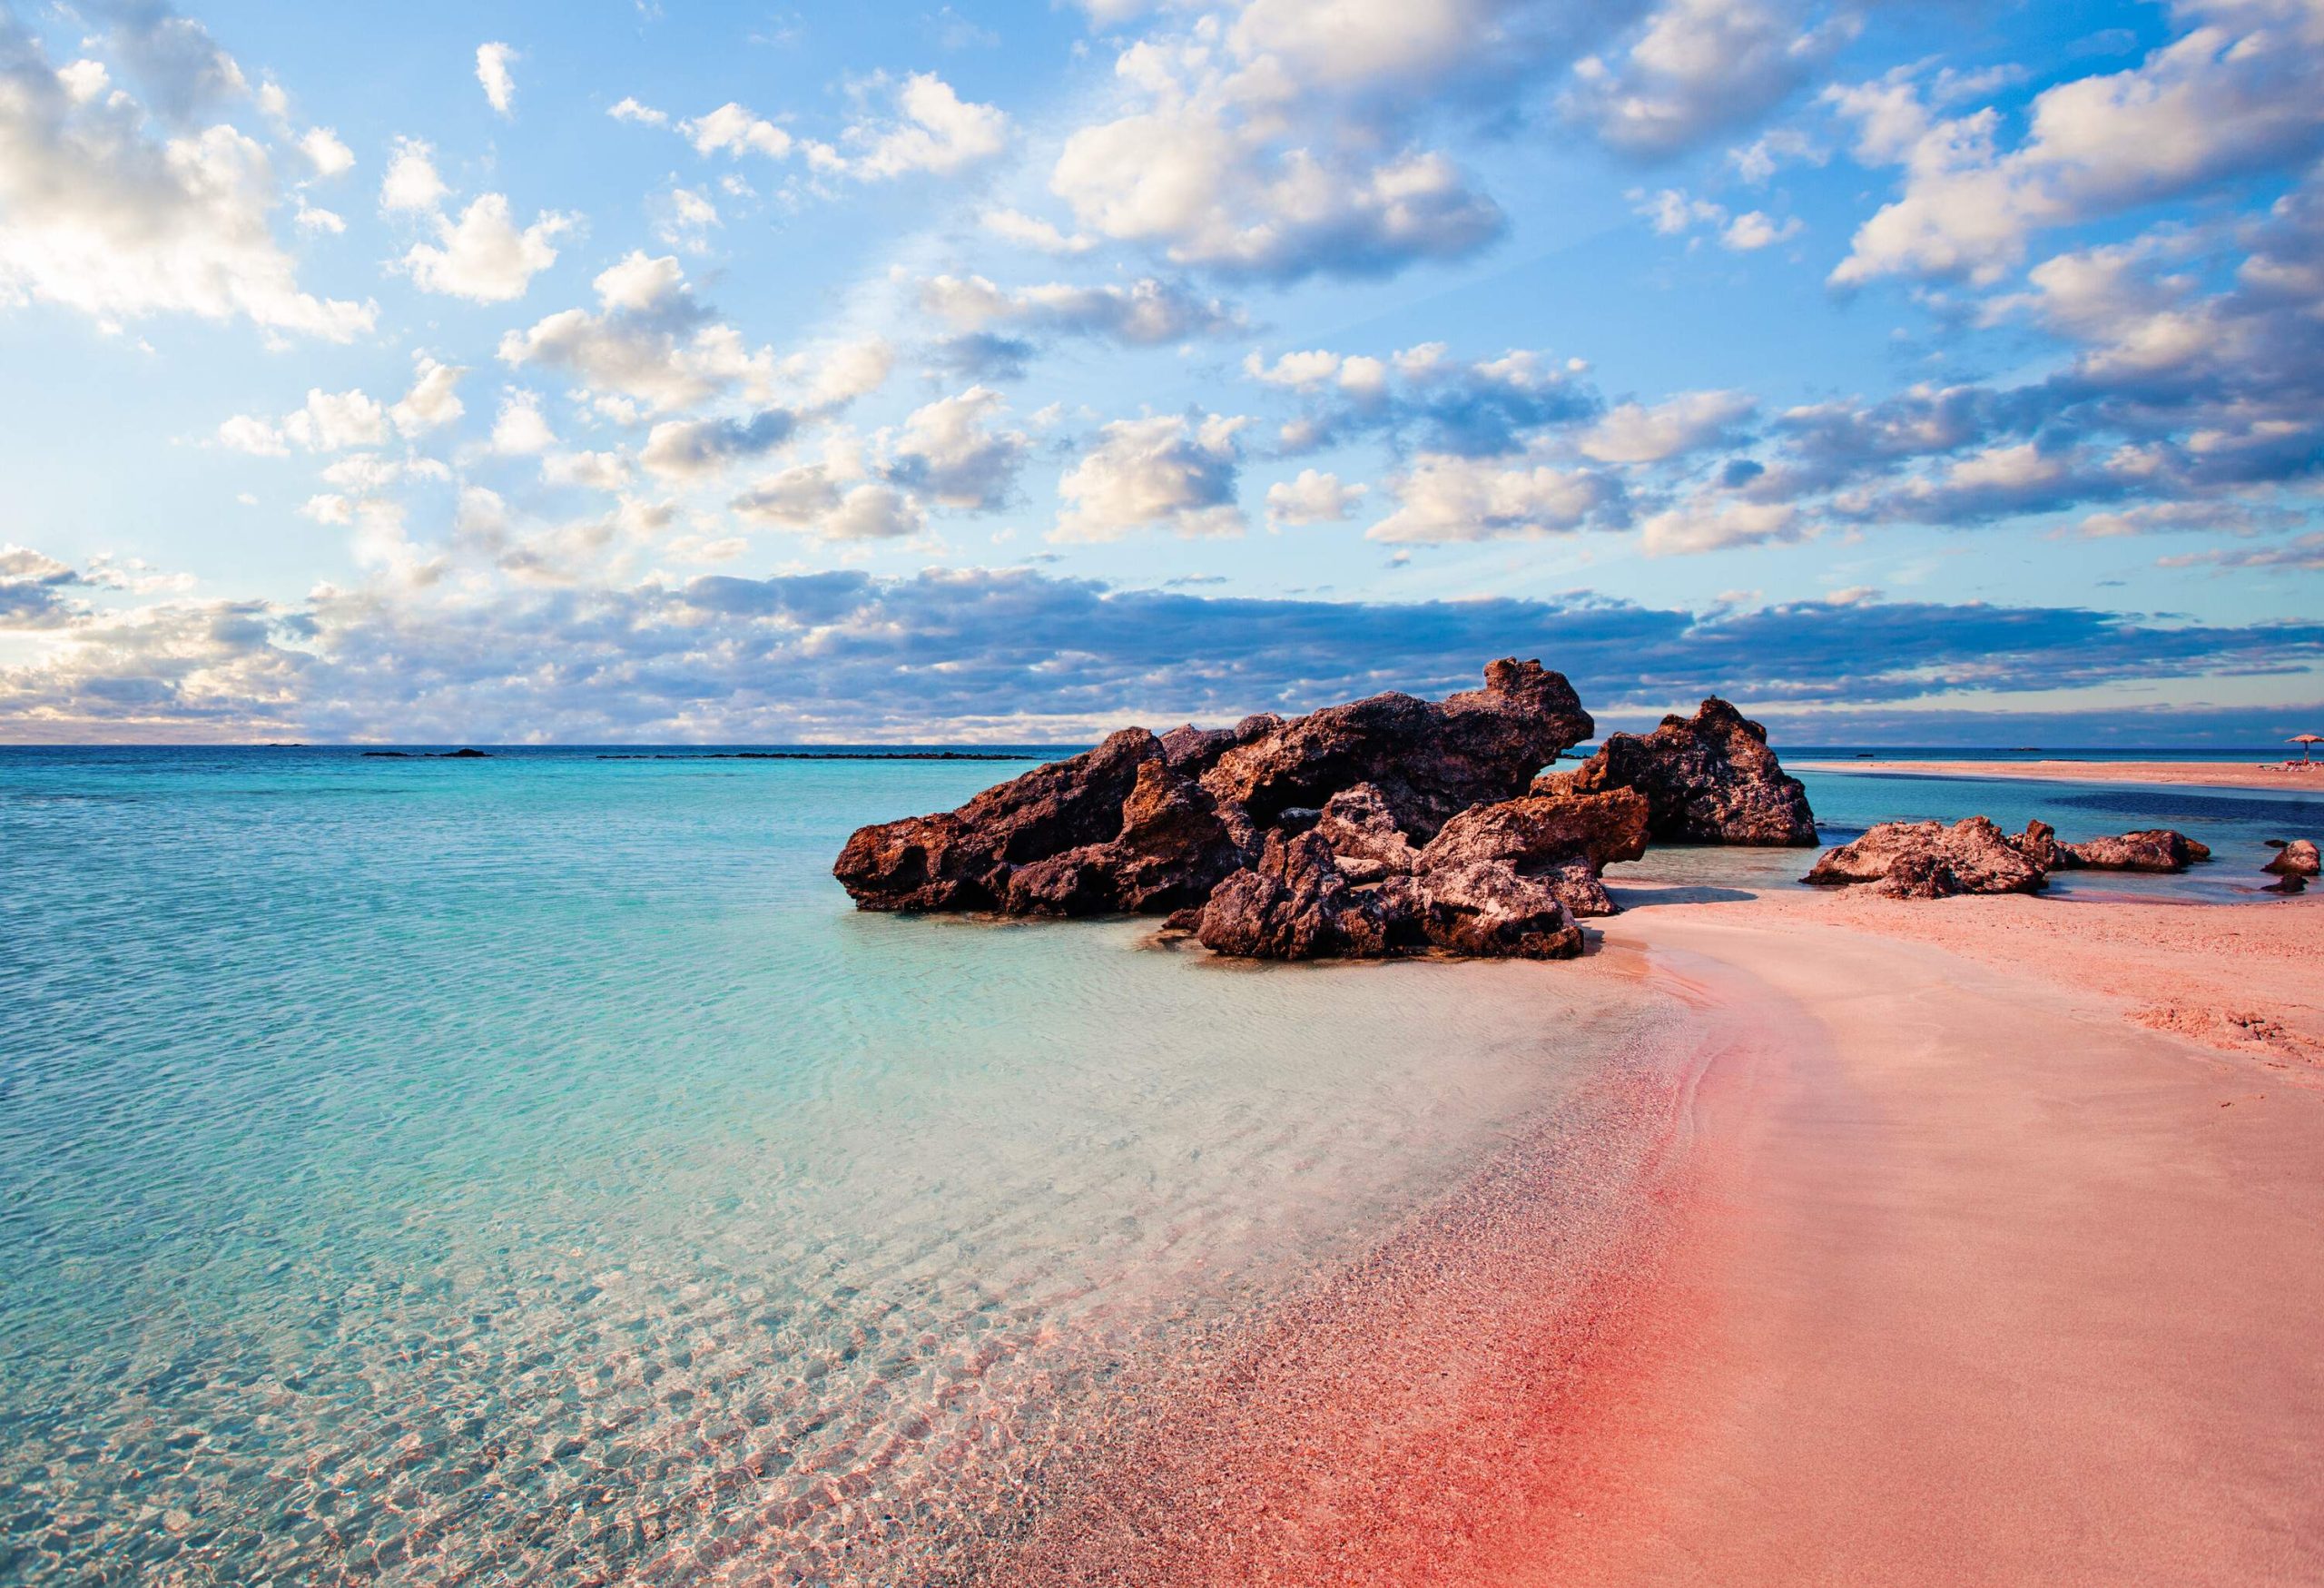 A pink sand beach with turquoise waters and rugged boulders on the shore.